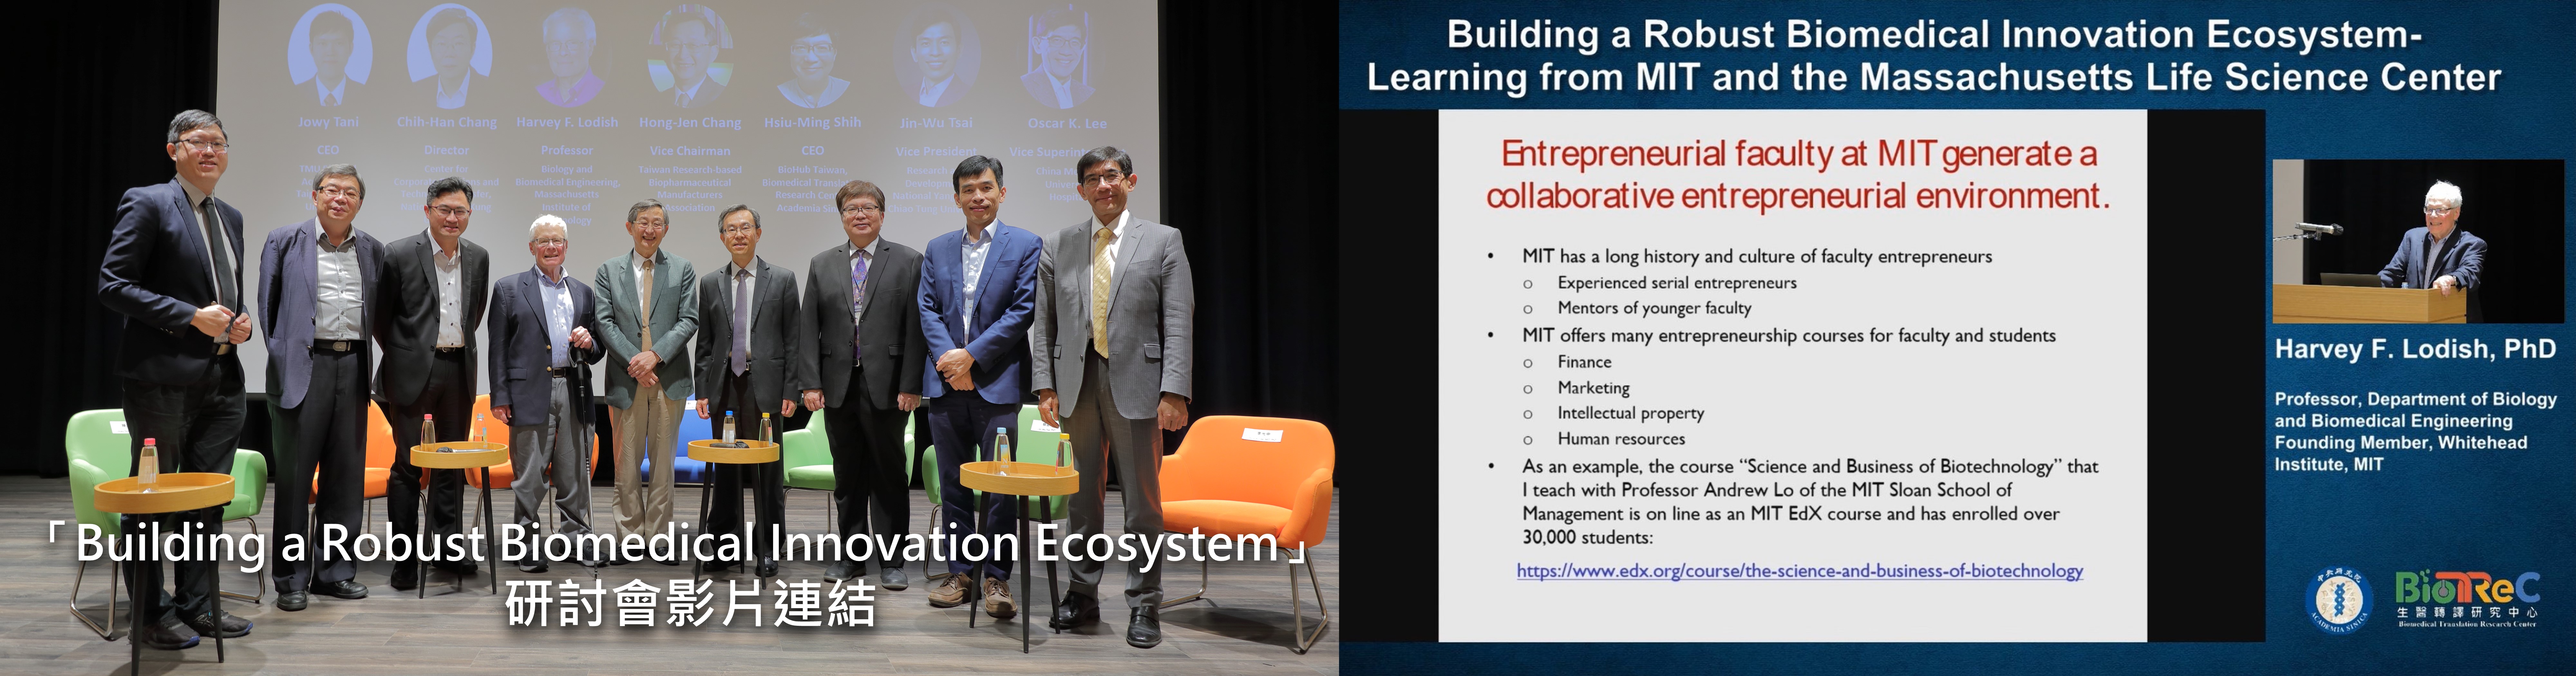 「Building a Robust Biomedical Innovation Ecosystem」   研討會影片連結